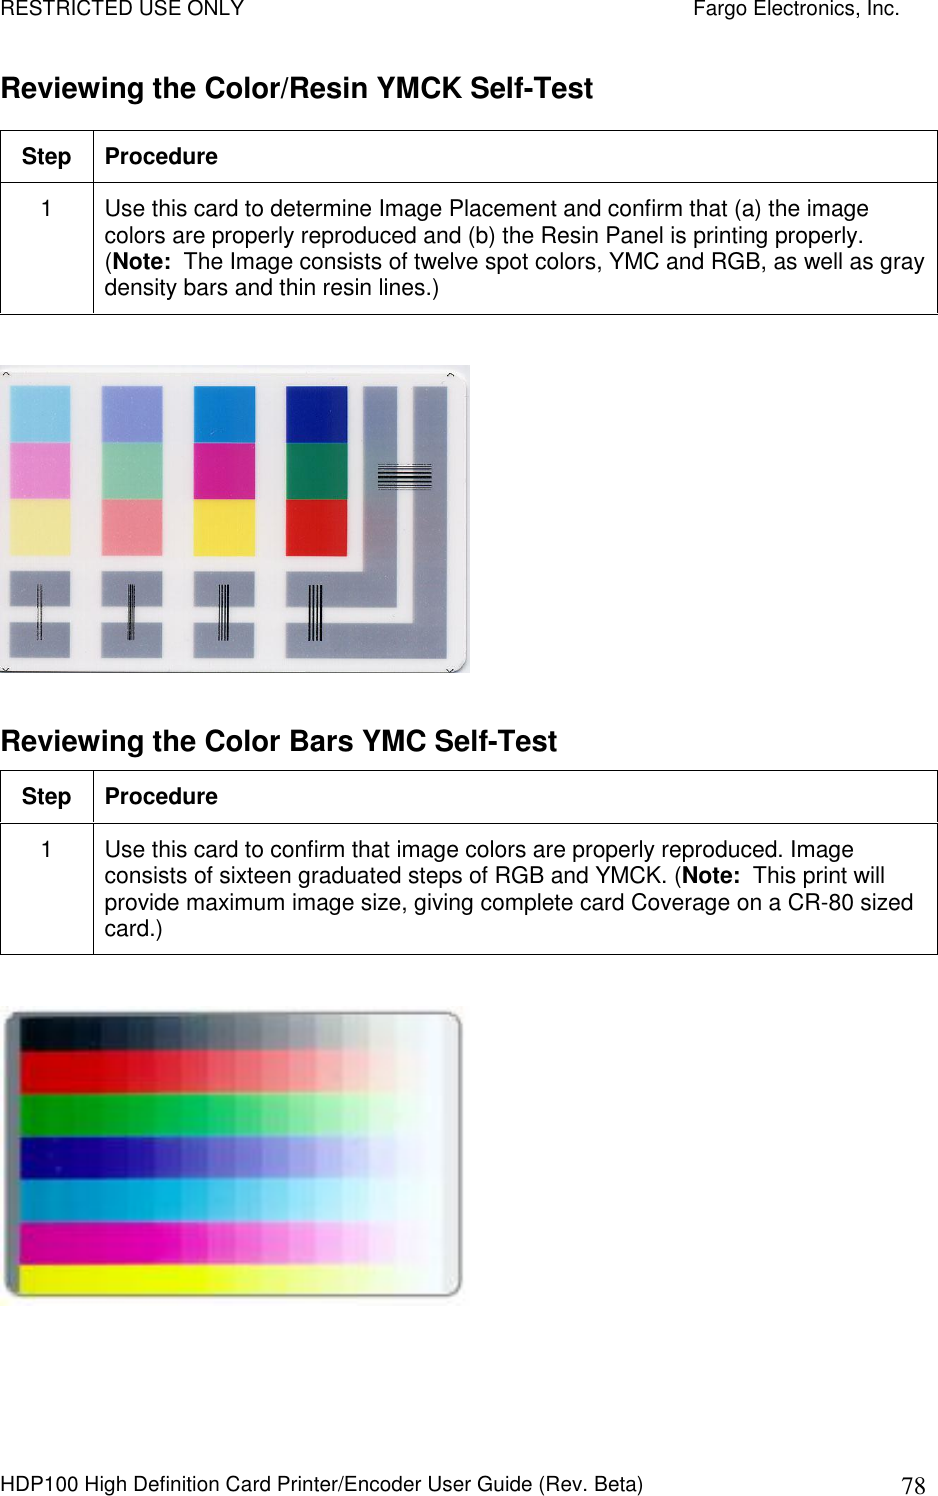 RESTRICTED USE ONLY    Fargo Electronics, Inc. HDP100 High Definition Card Printer/Encoder User Guide (Rev. Beta)  78 Reviewing the Color/Resin YMCK Self-Test Step  Procedure 1  Use this card to determine Image Placement and confirm that (a) the image colors are properly reproduced and (b) the Resin Panel is printing properly. (Note:  The Image consists of twelve spot colors, YMC and RGB, as well as gray density bars and thin resin lines.)    Reviewing the Color Bars YMC Self-Test Step  Procedure 1  Use this card to confirm that image colors are properly reproduced. Image consists of sixteen graduated steps of RGB and YMCK. (Note:  This print will provide maximum image size, giving complete card Coverage on a CR-80 sized card.)    